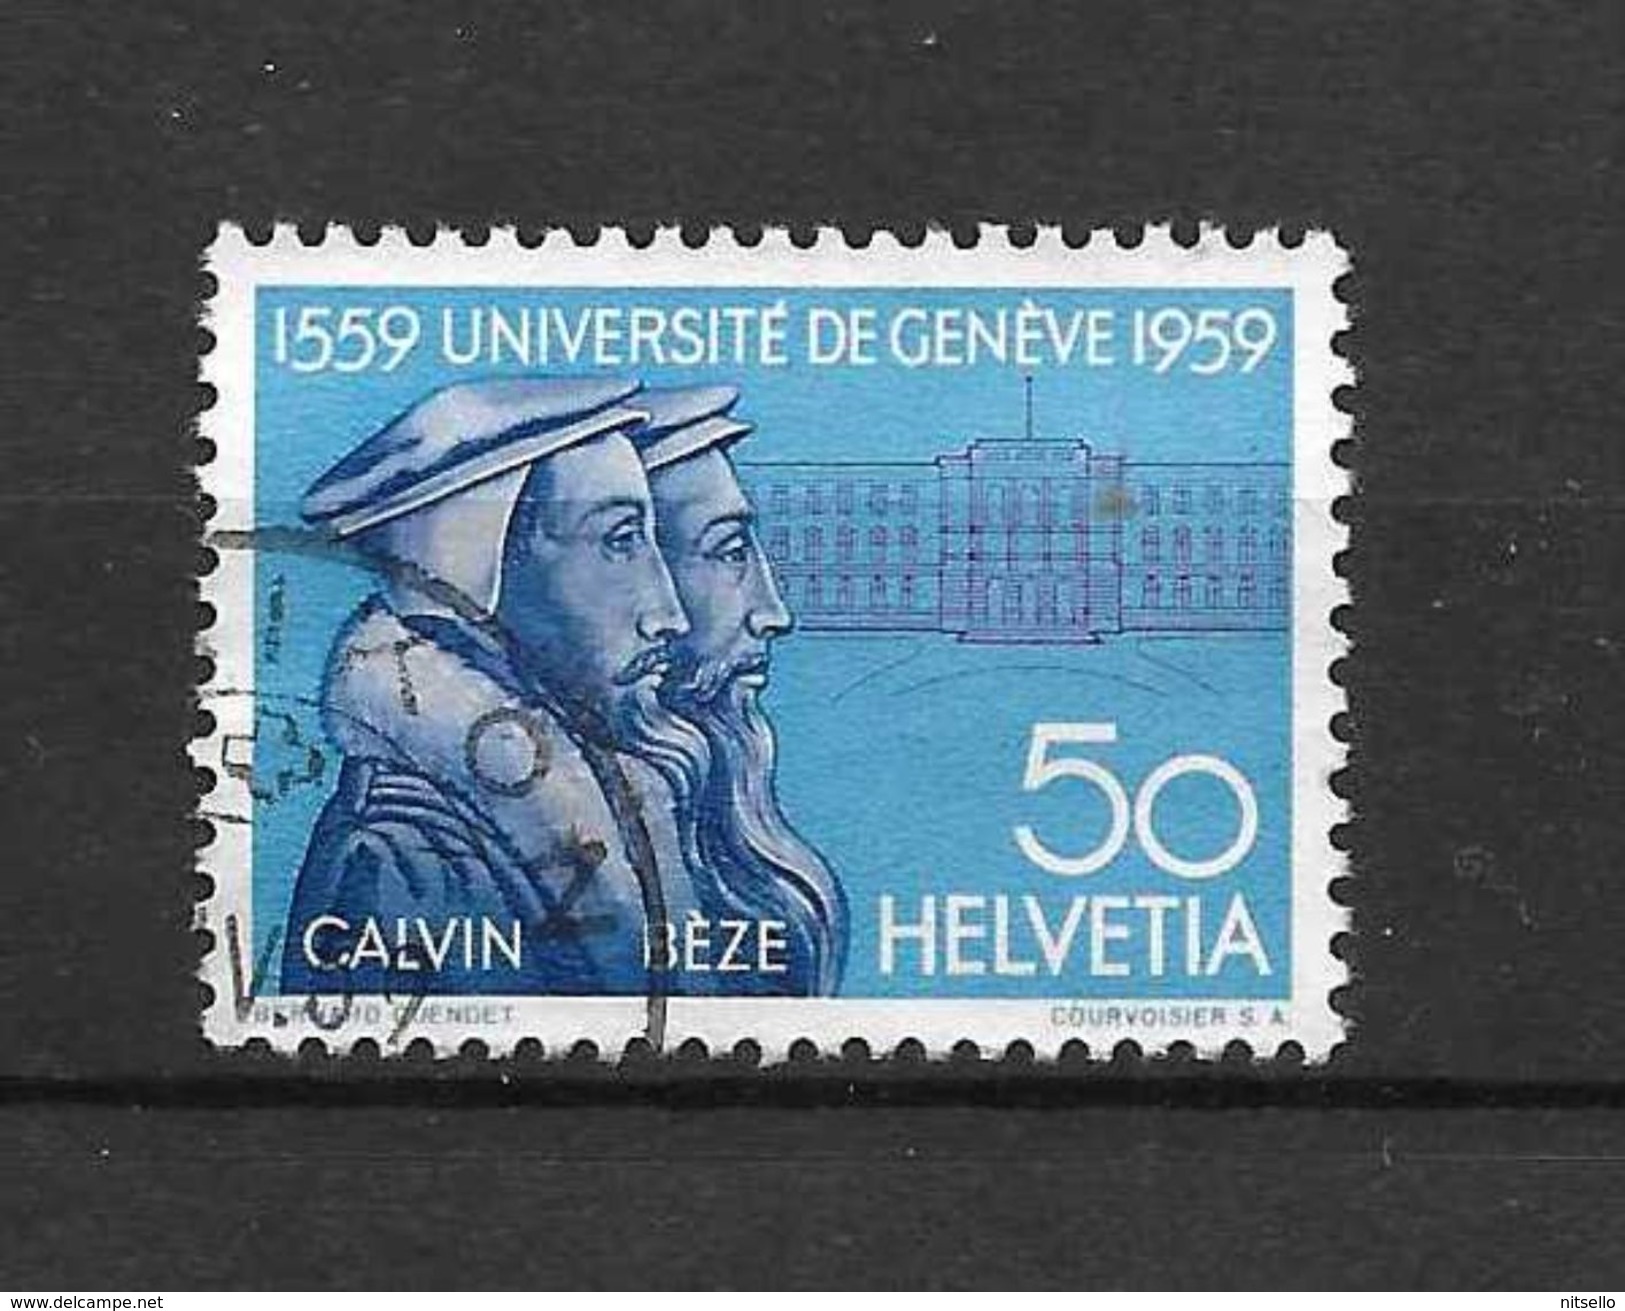 LOTE 1530   ///   (C010)  SUIZA  1959   YVERT Nº: 624 - Used Stamps